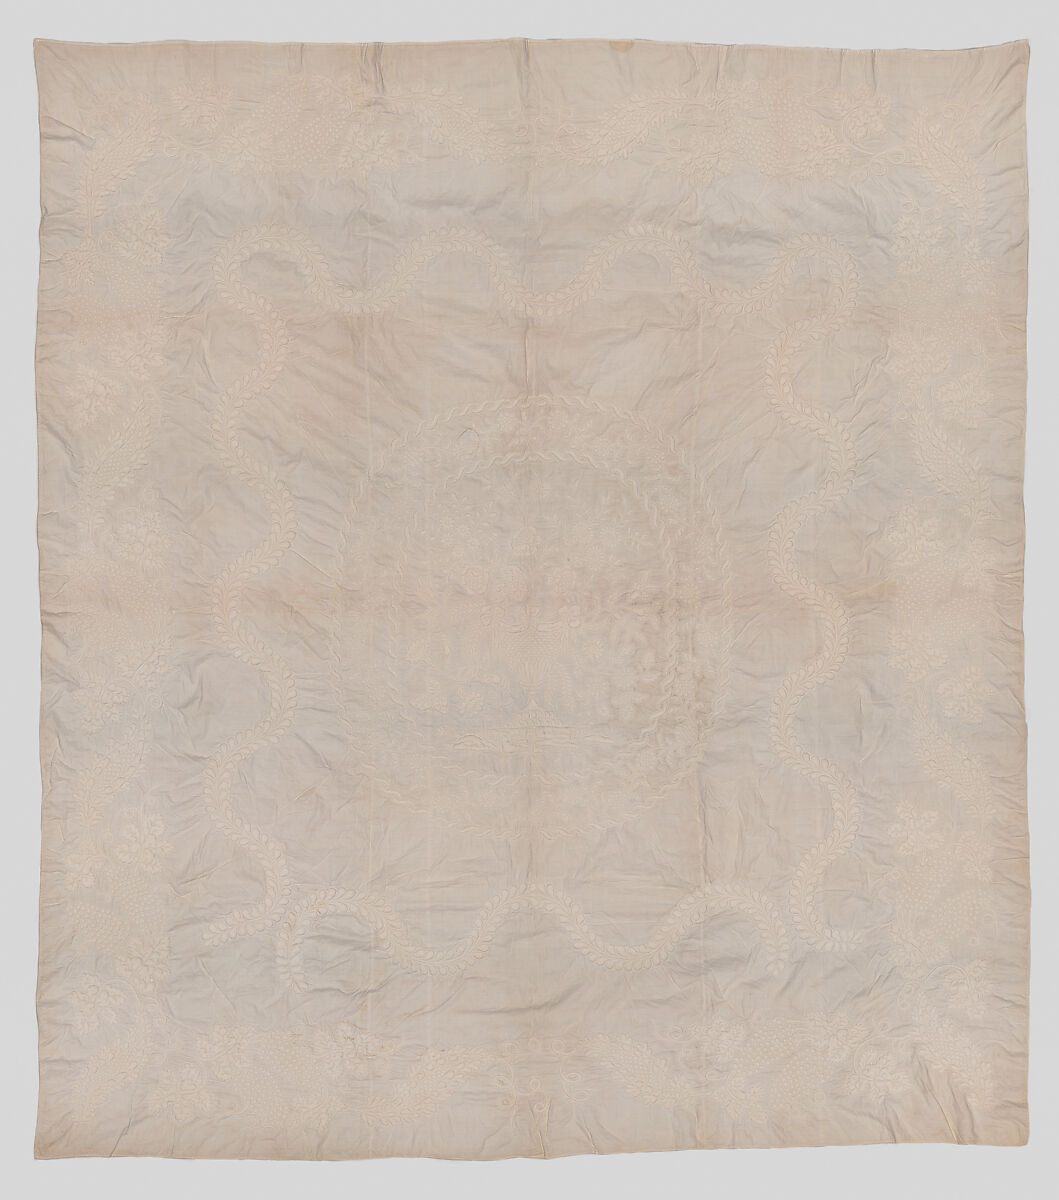 Stuffed and corded quilt, Cotton: "whitework" stuffed and corded, probably English 